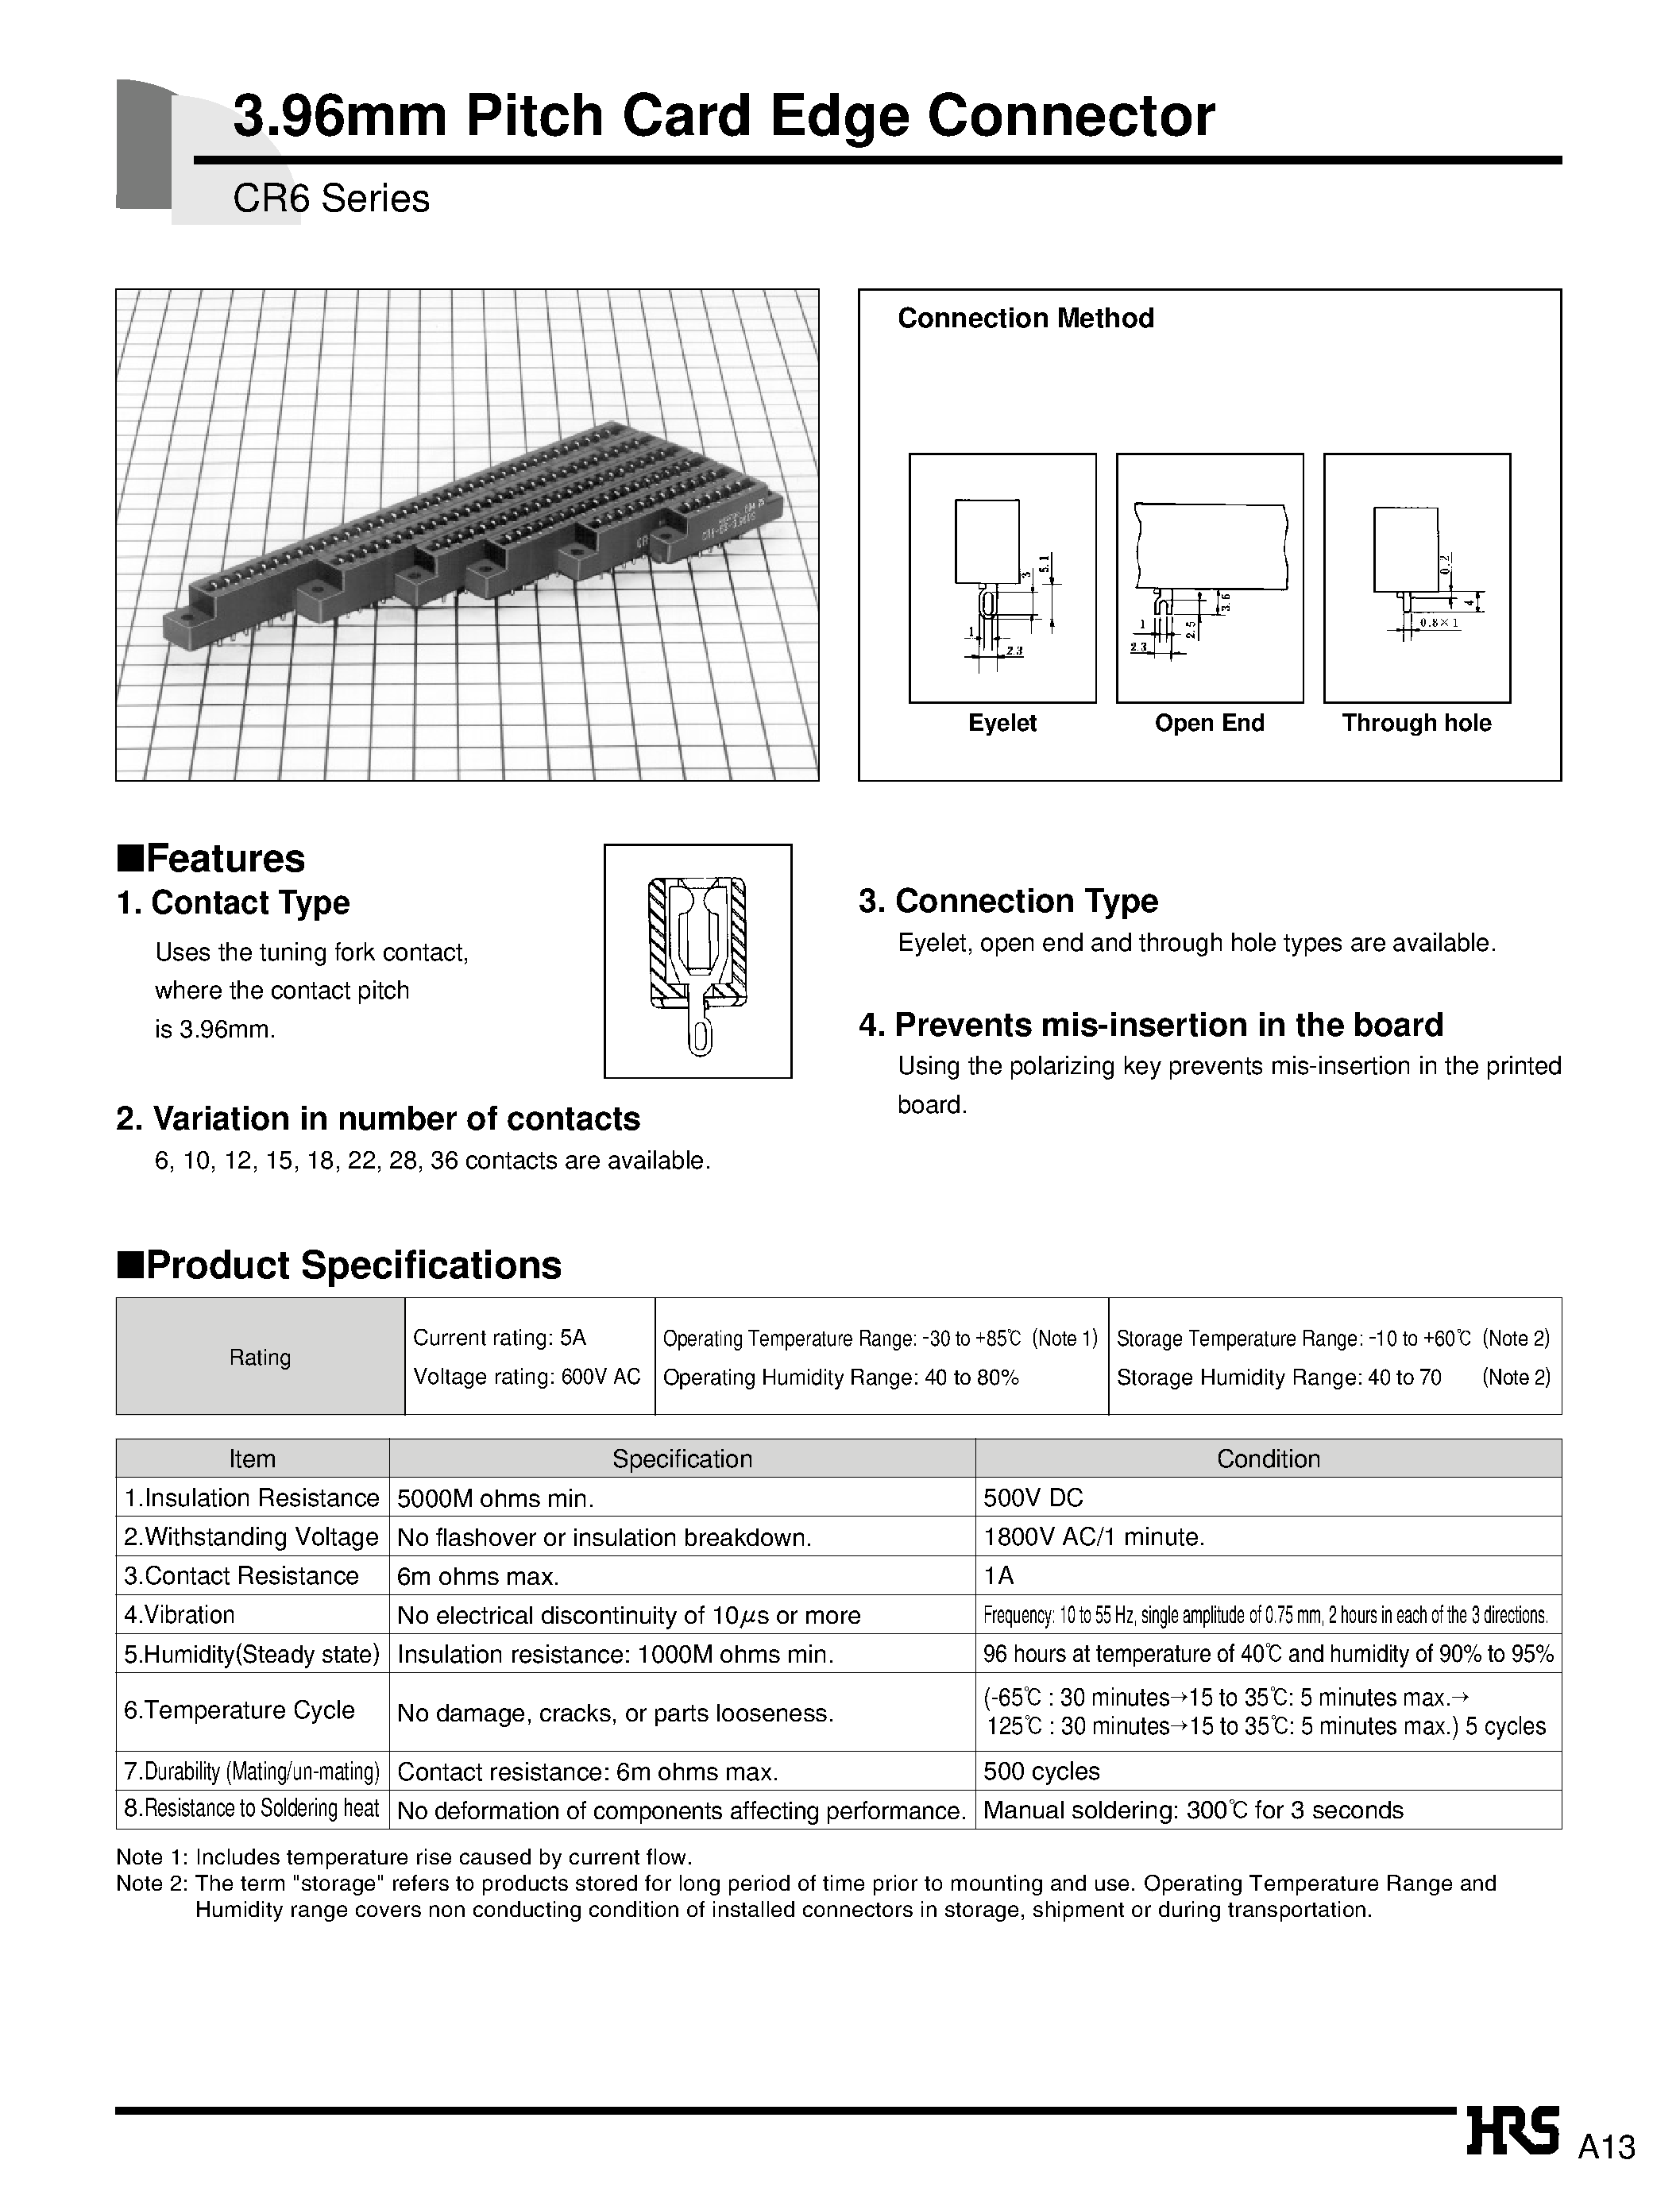 Datasheet CR6-12S-3.96E - 3.96mm Pitch Card Edge Connector page 1